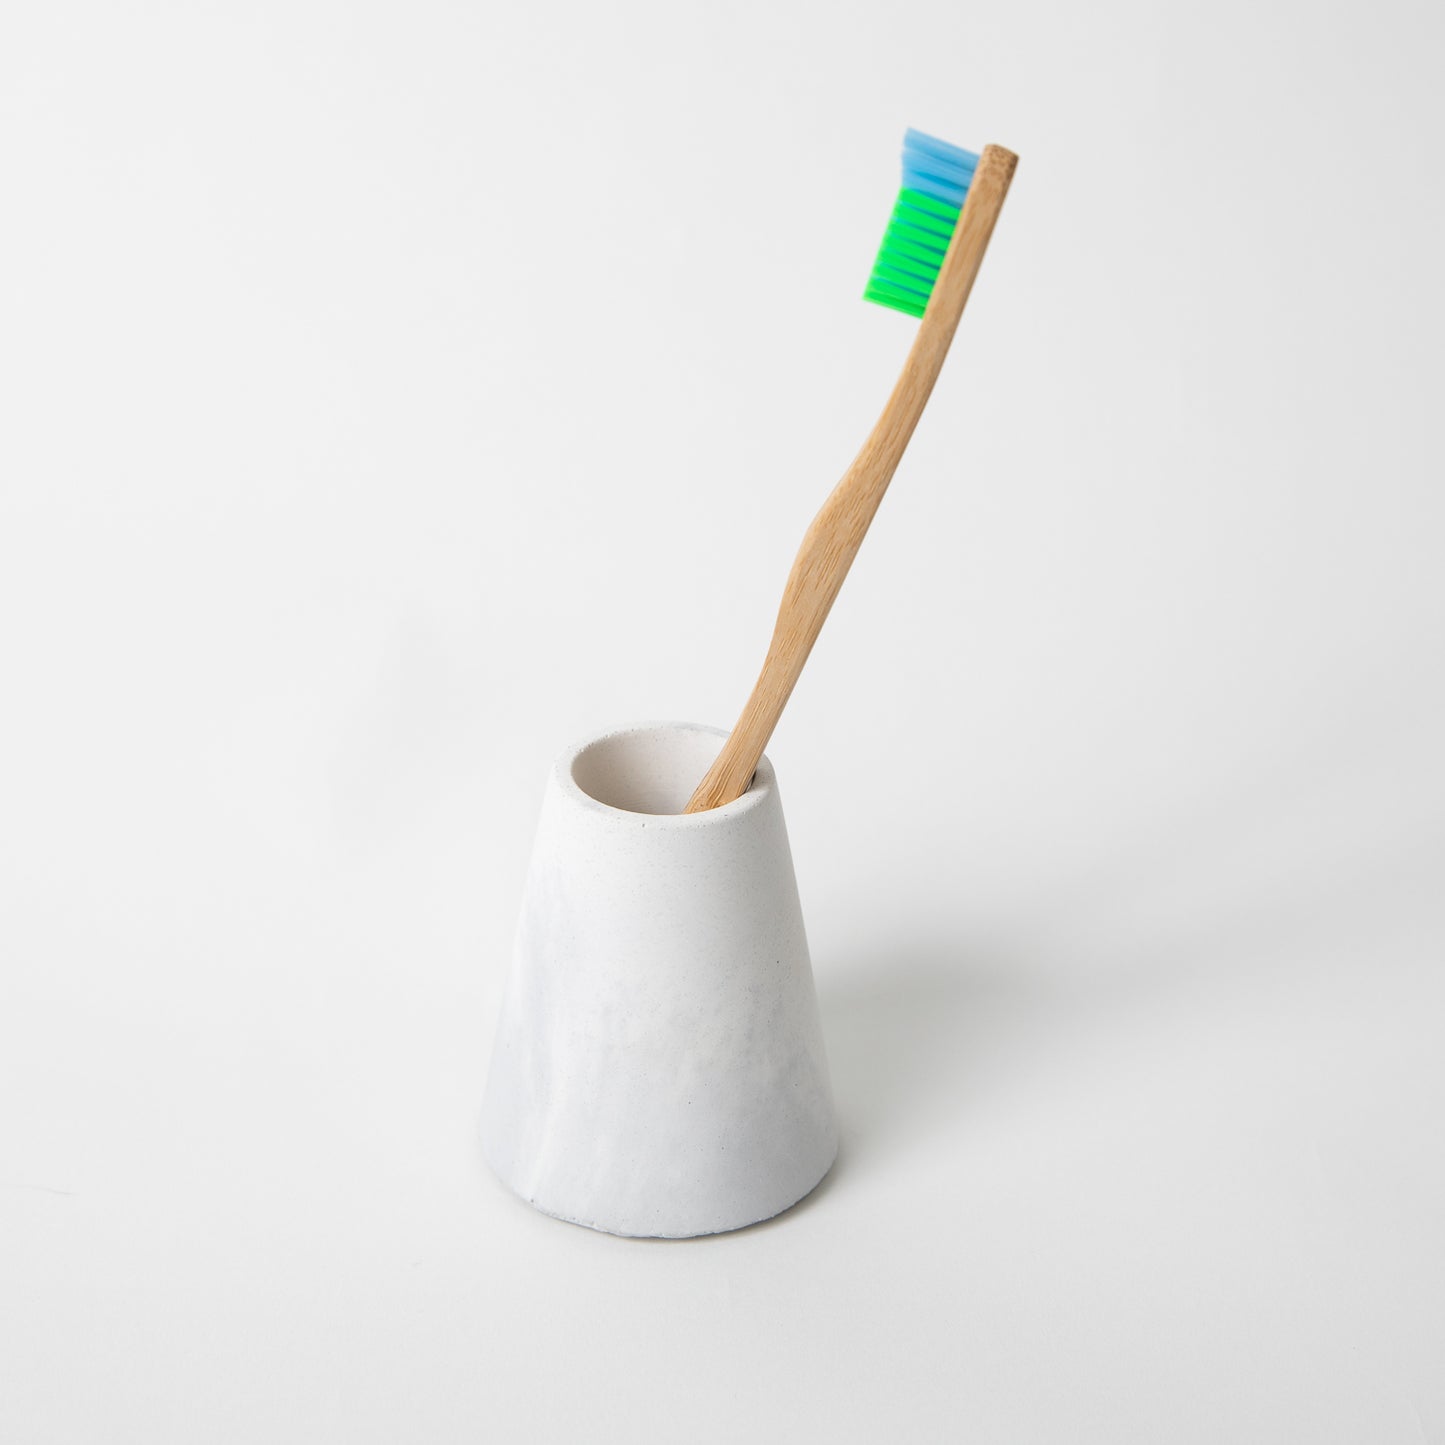 Concrete terrazzo toothbrush holder seen in grey and white with toothbrush.